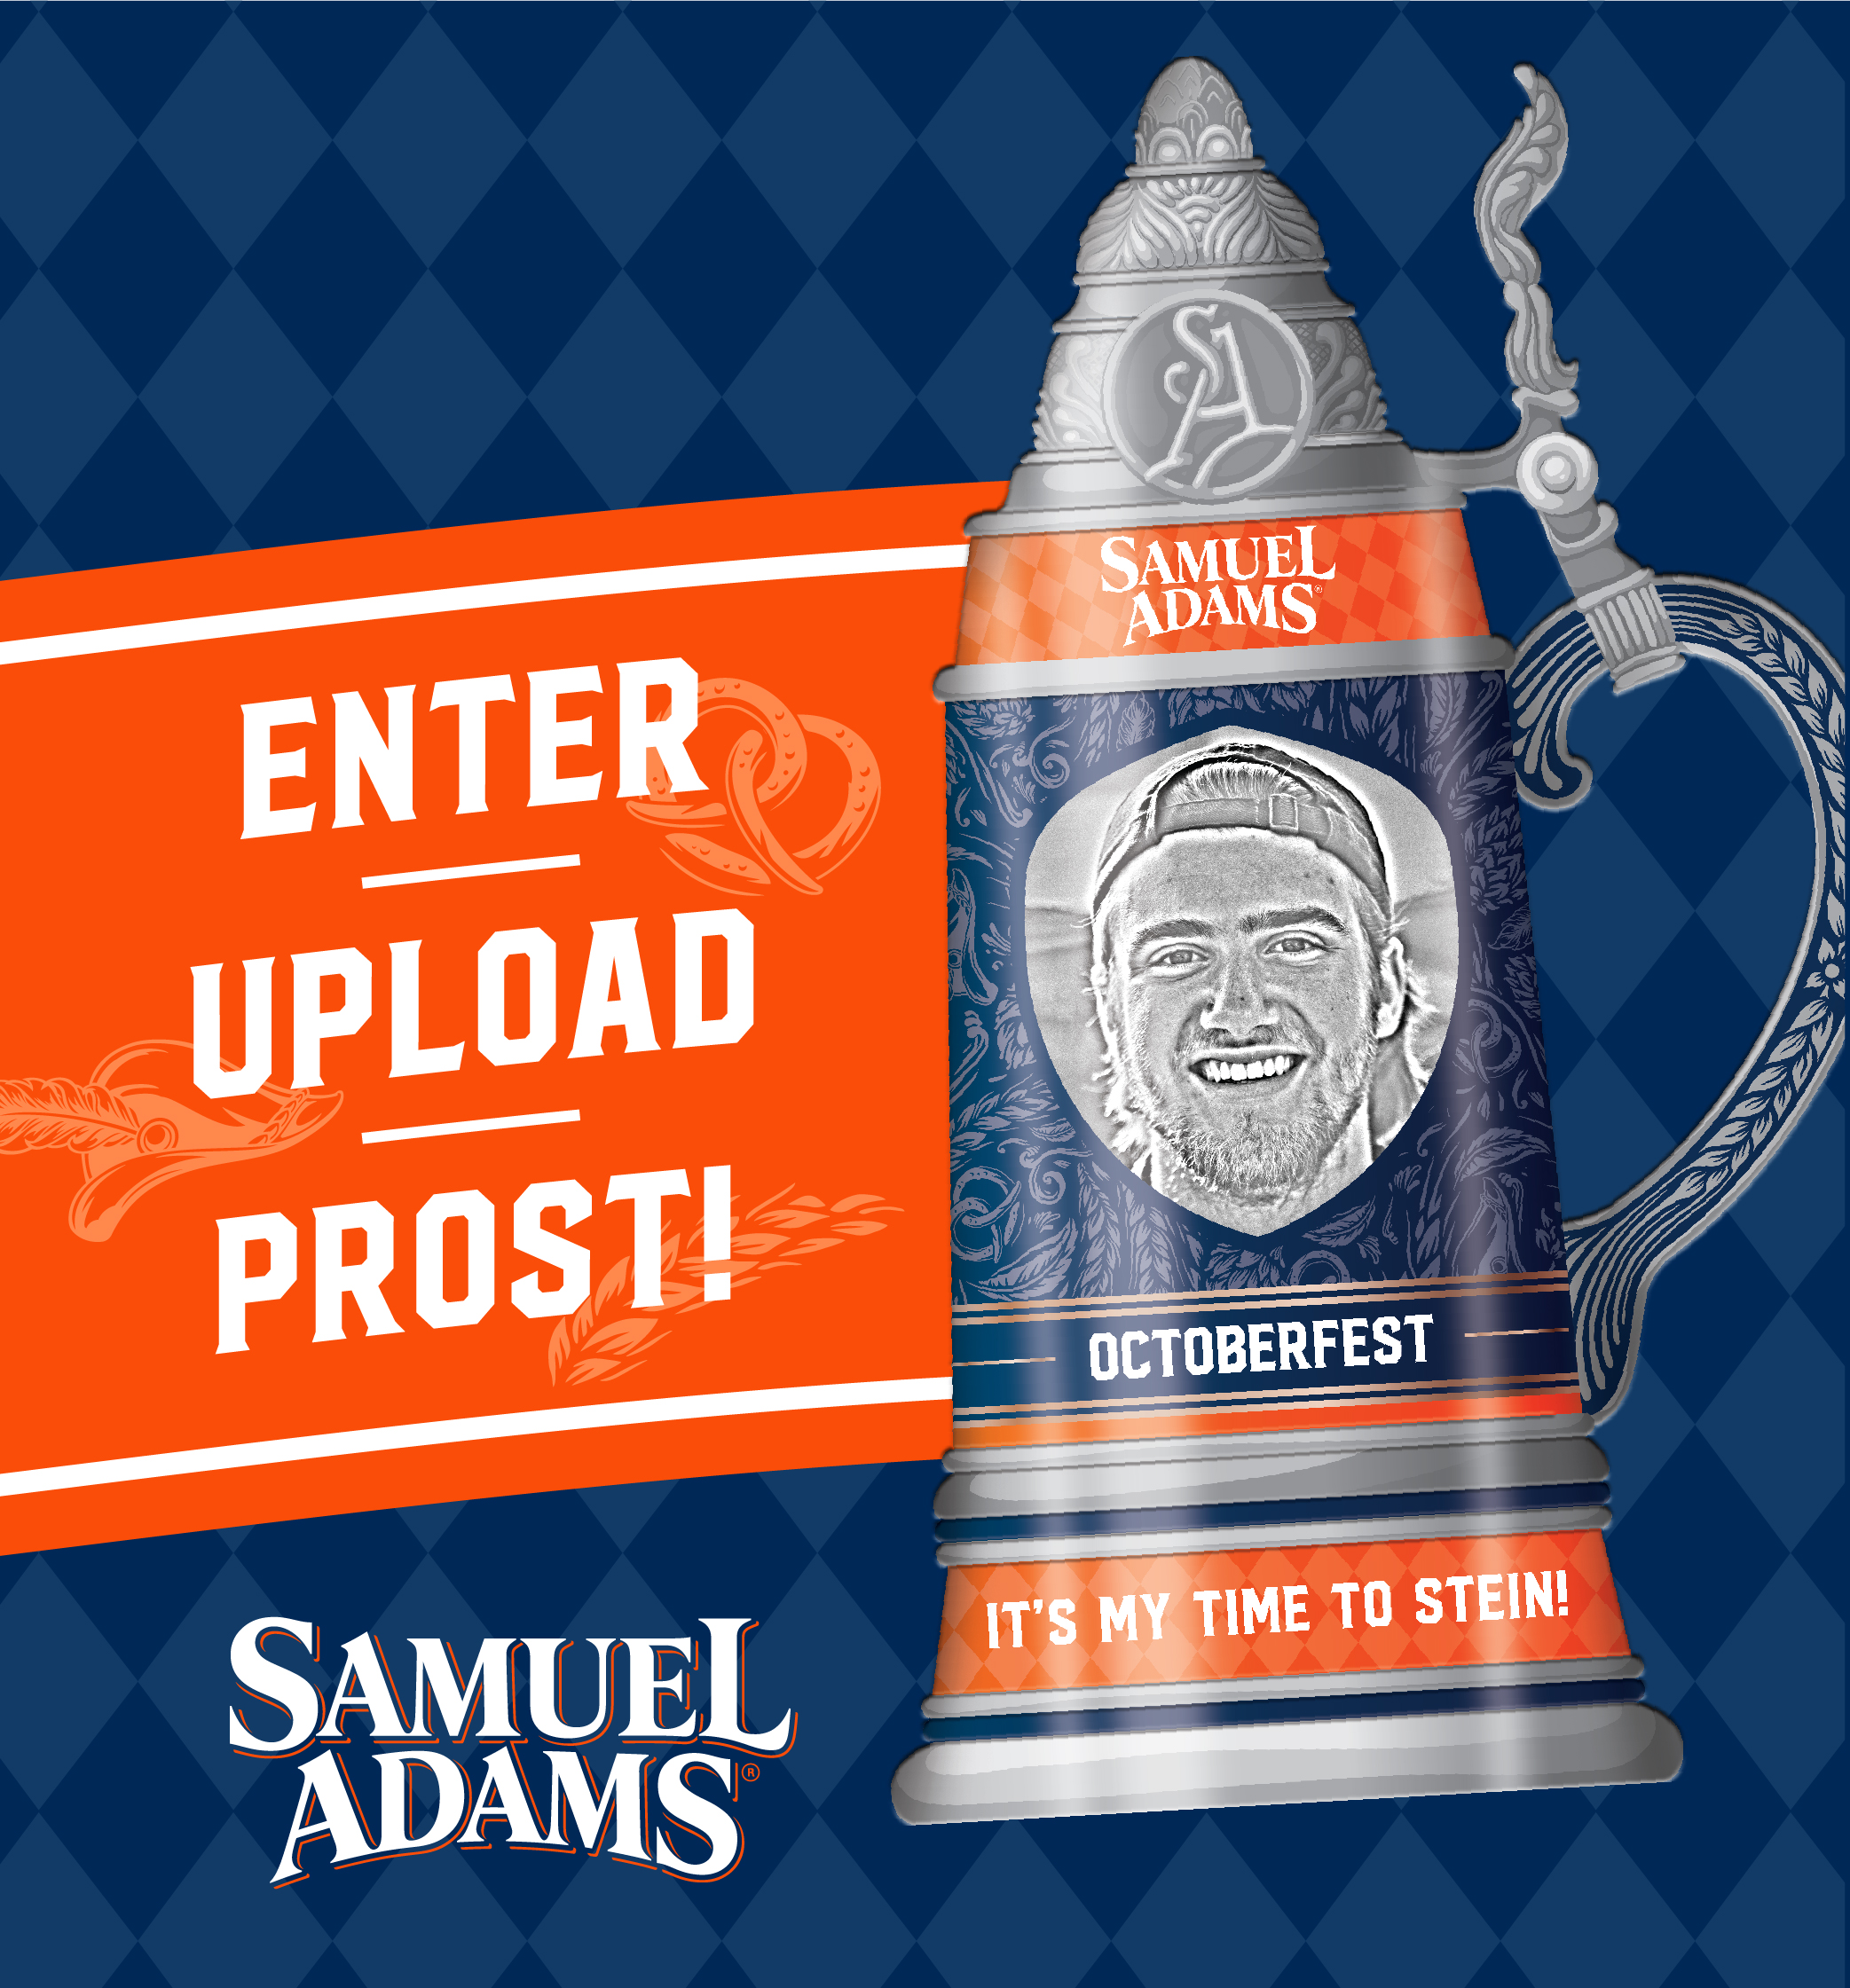 Win a Customized Beer Stein!